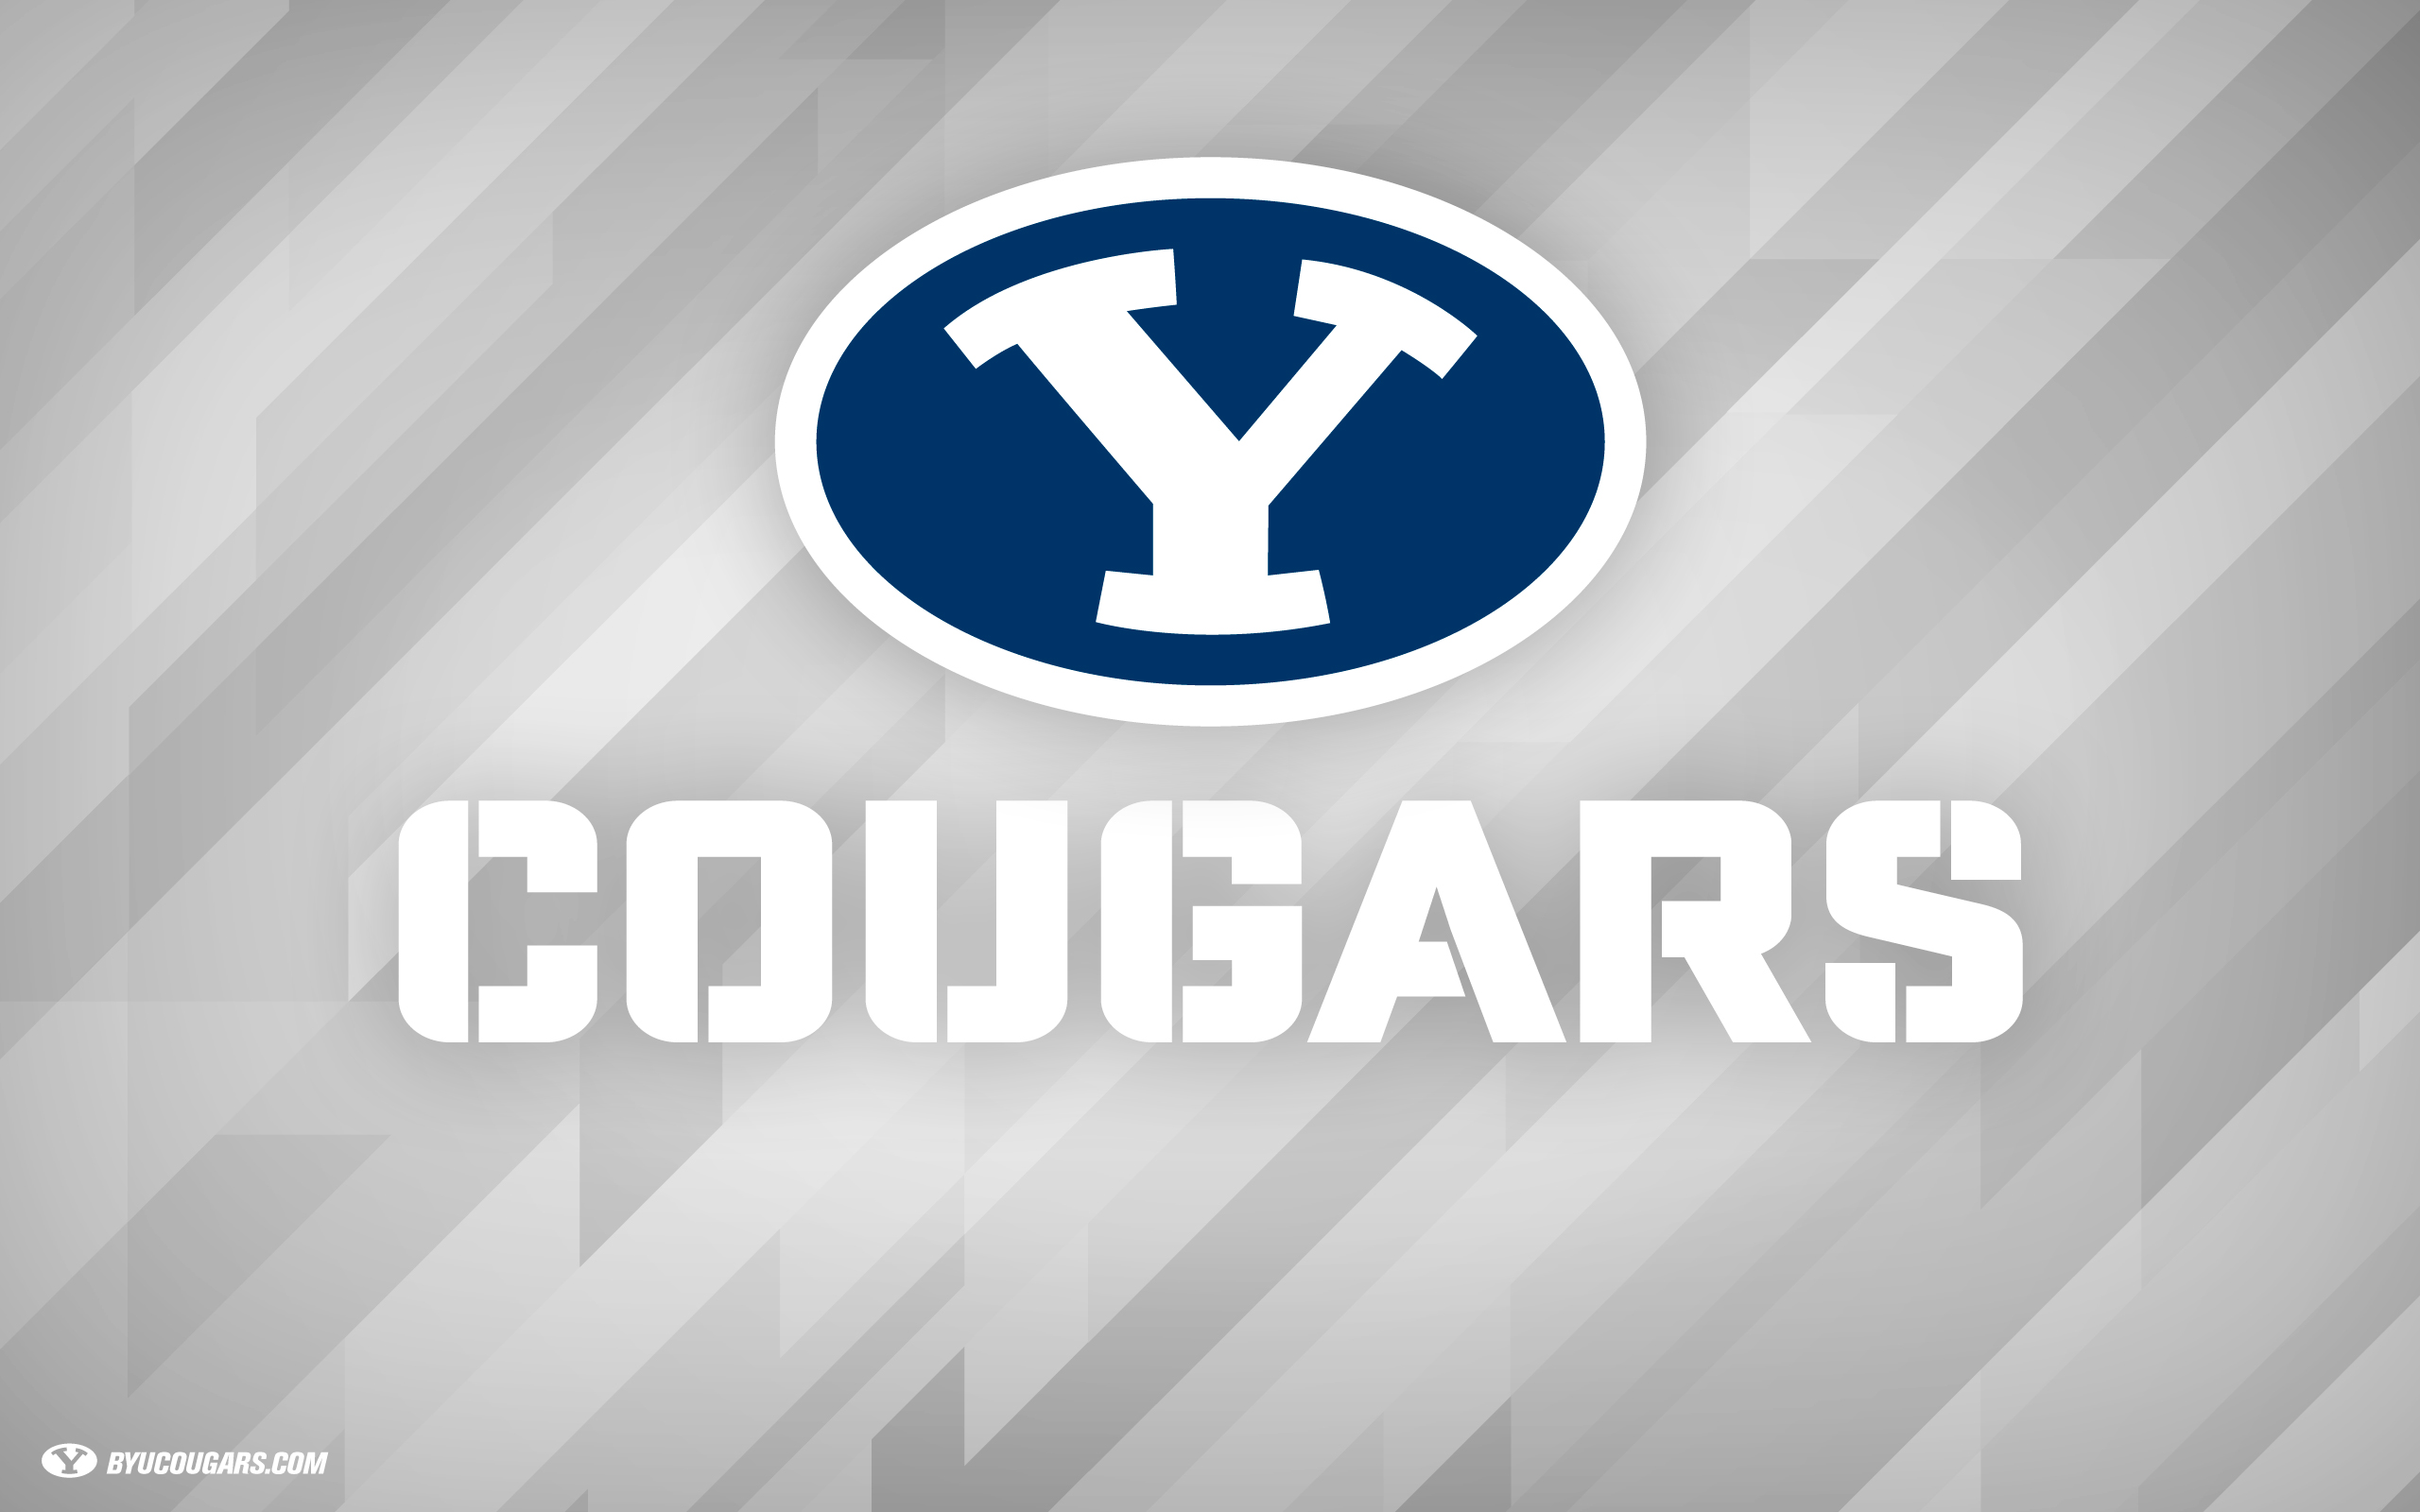 Most Recent Byu Wallpaper The Official Site Of Athletics